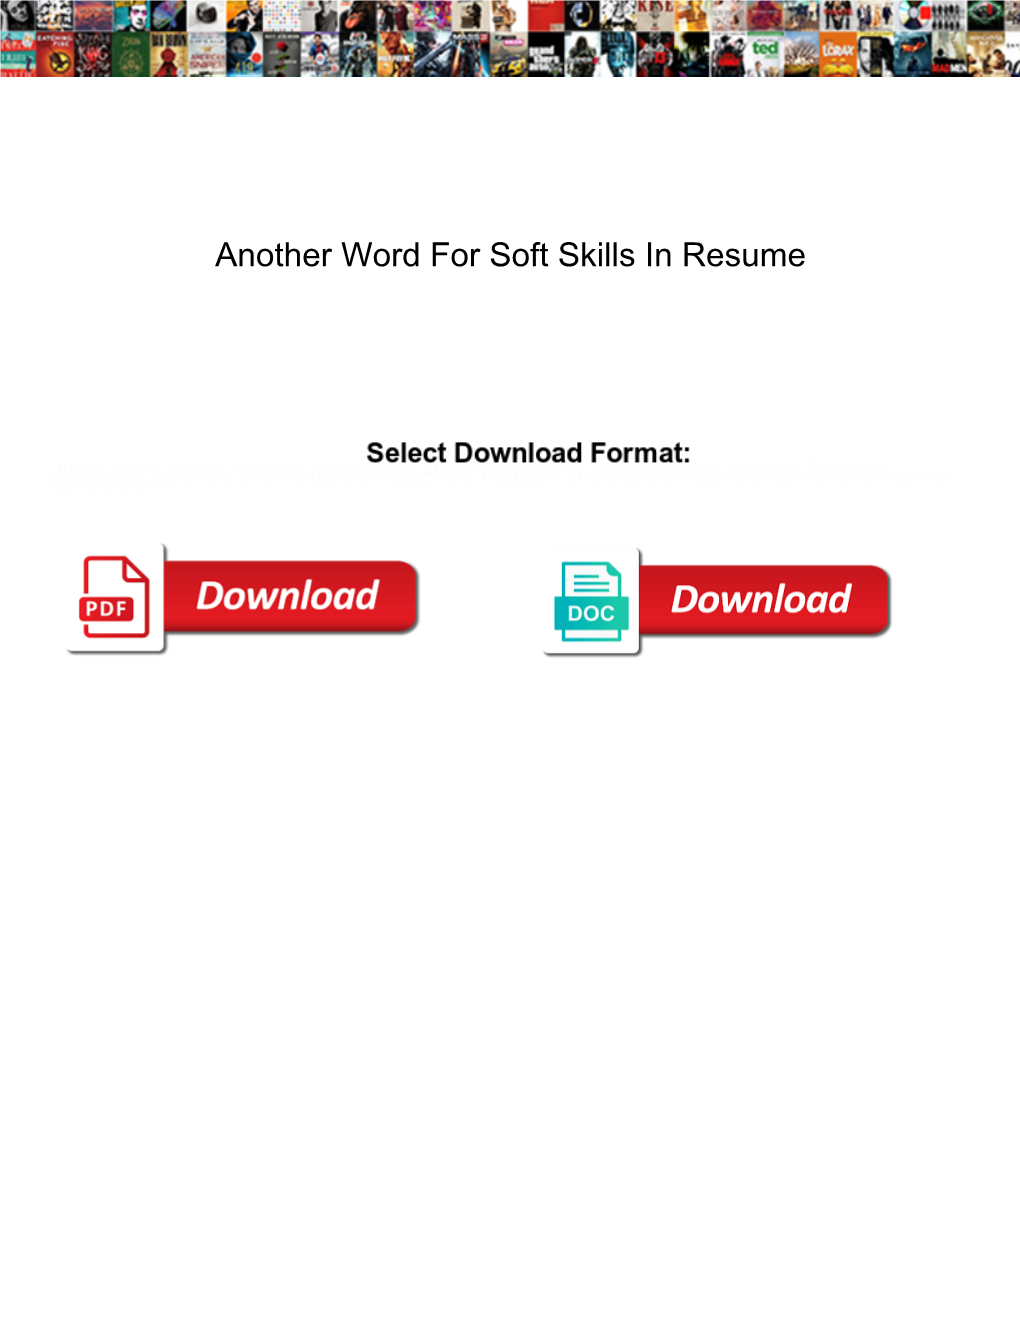 Another Word for Soft Skills in Resume